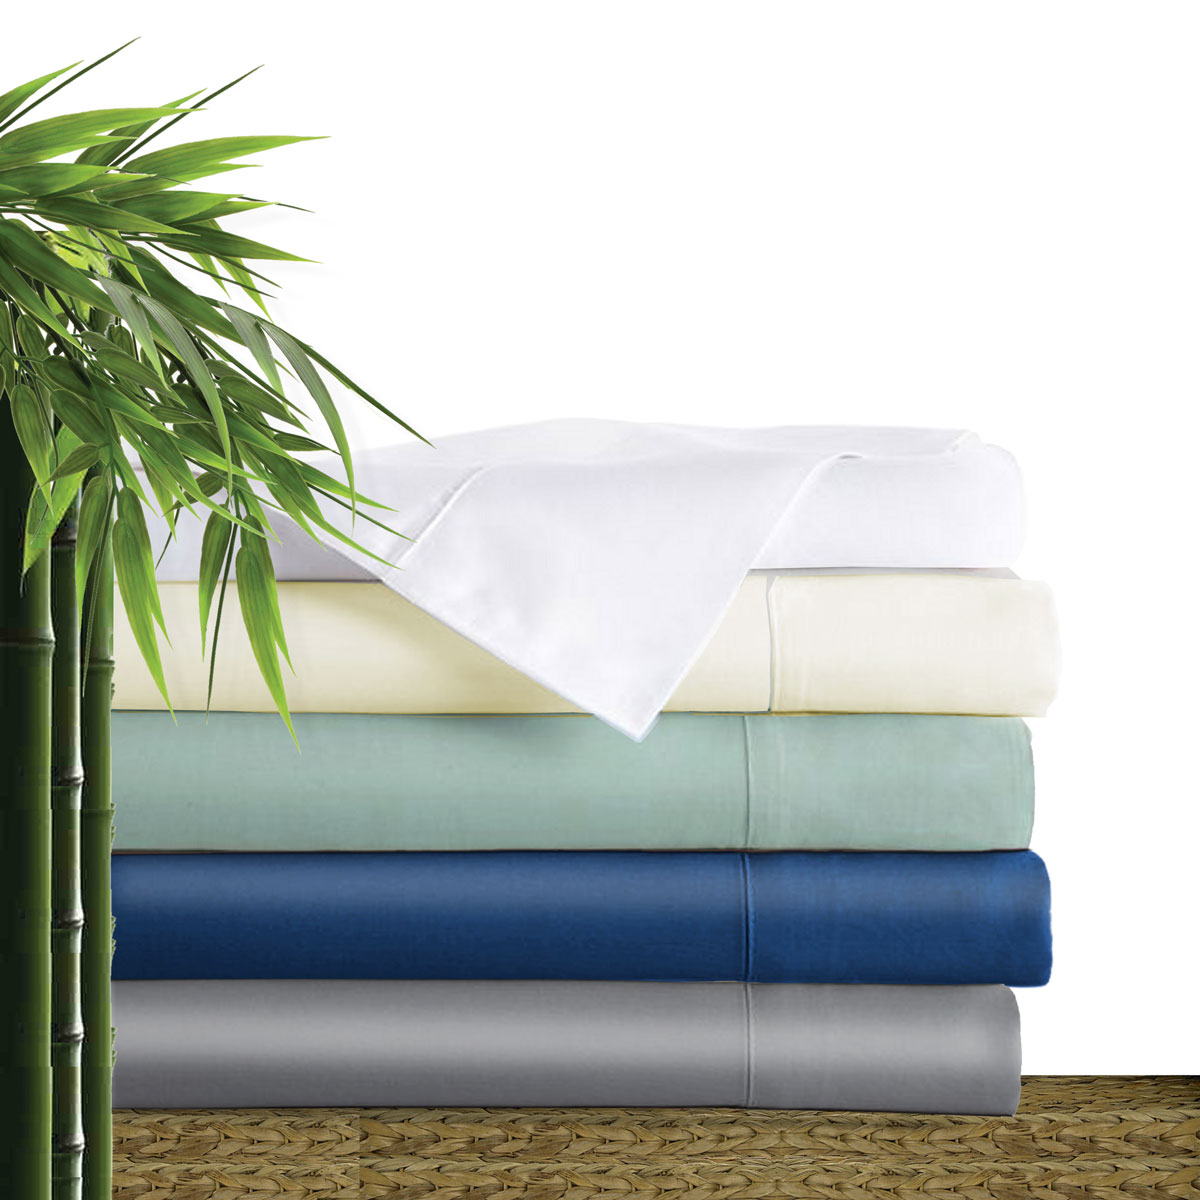 https://cdn11.bigcommerce.com/s-2e839/images/stencil/original/products/29/3927/Eco-Luxe-Oversized-Bamboo-Sheet-Sets__79412.1700334236.jpg?c=2